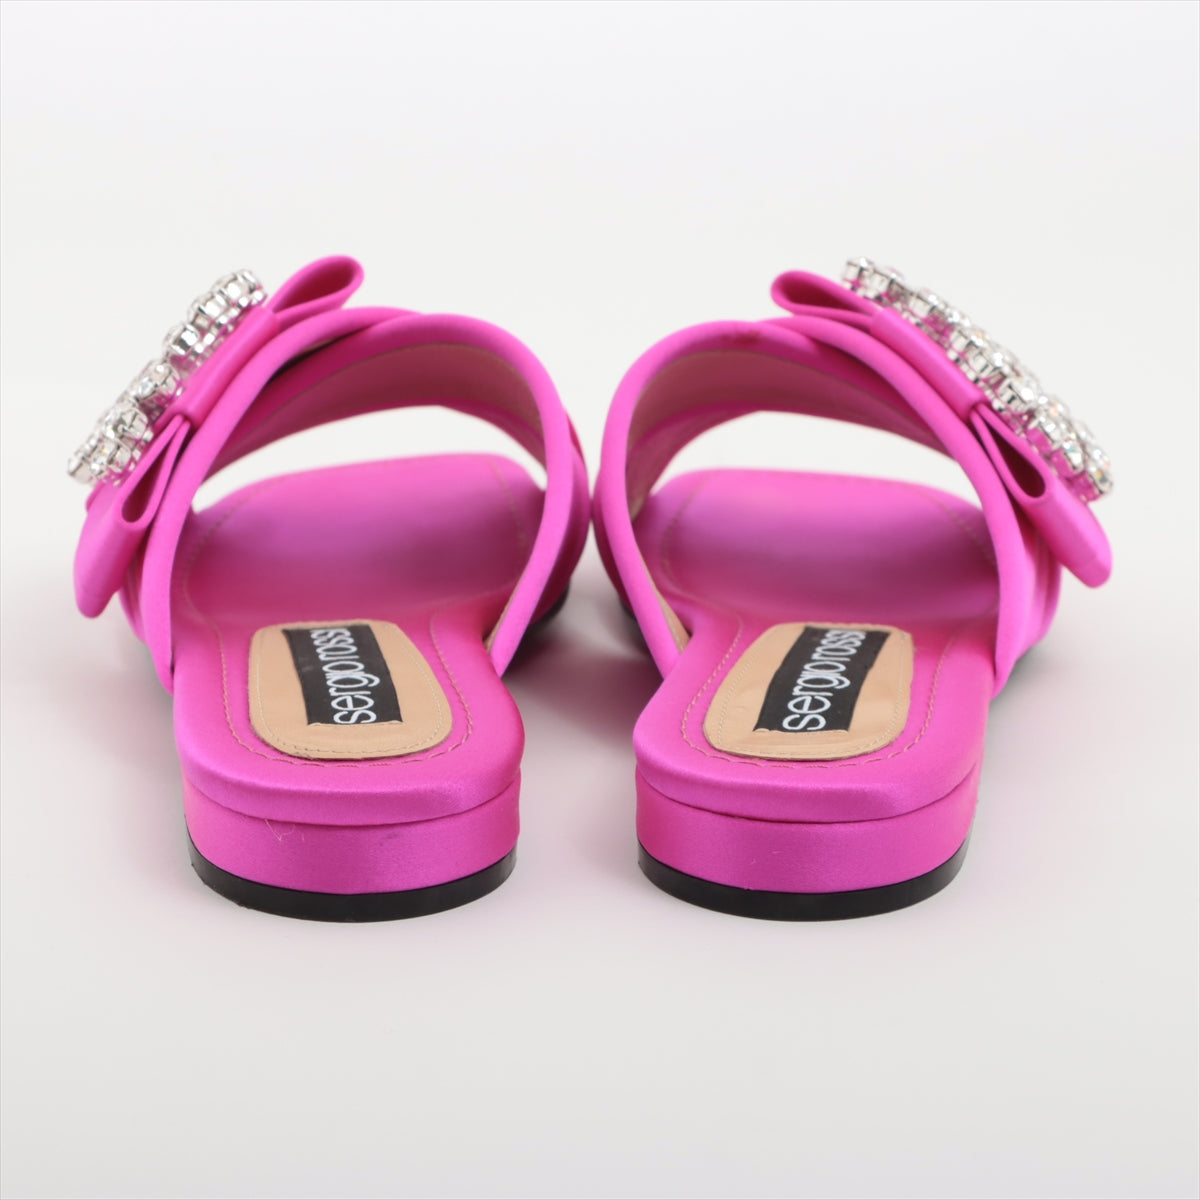 Sergio Rossi Satin Sandals 35 Ladies' Pink A83730 box There is a bag Bijou